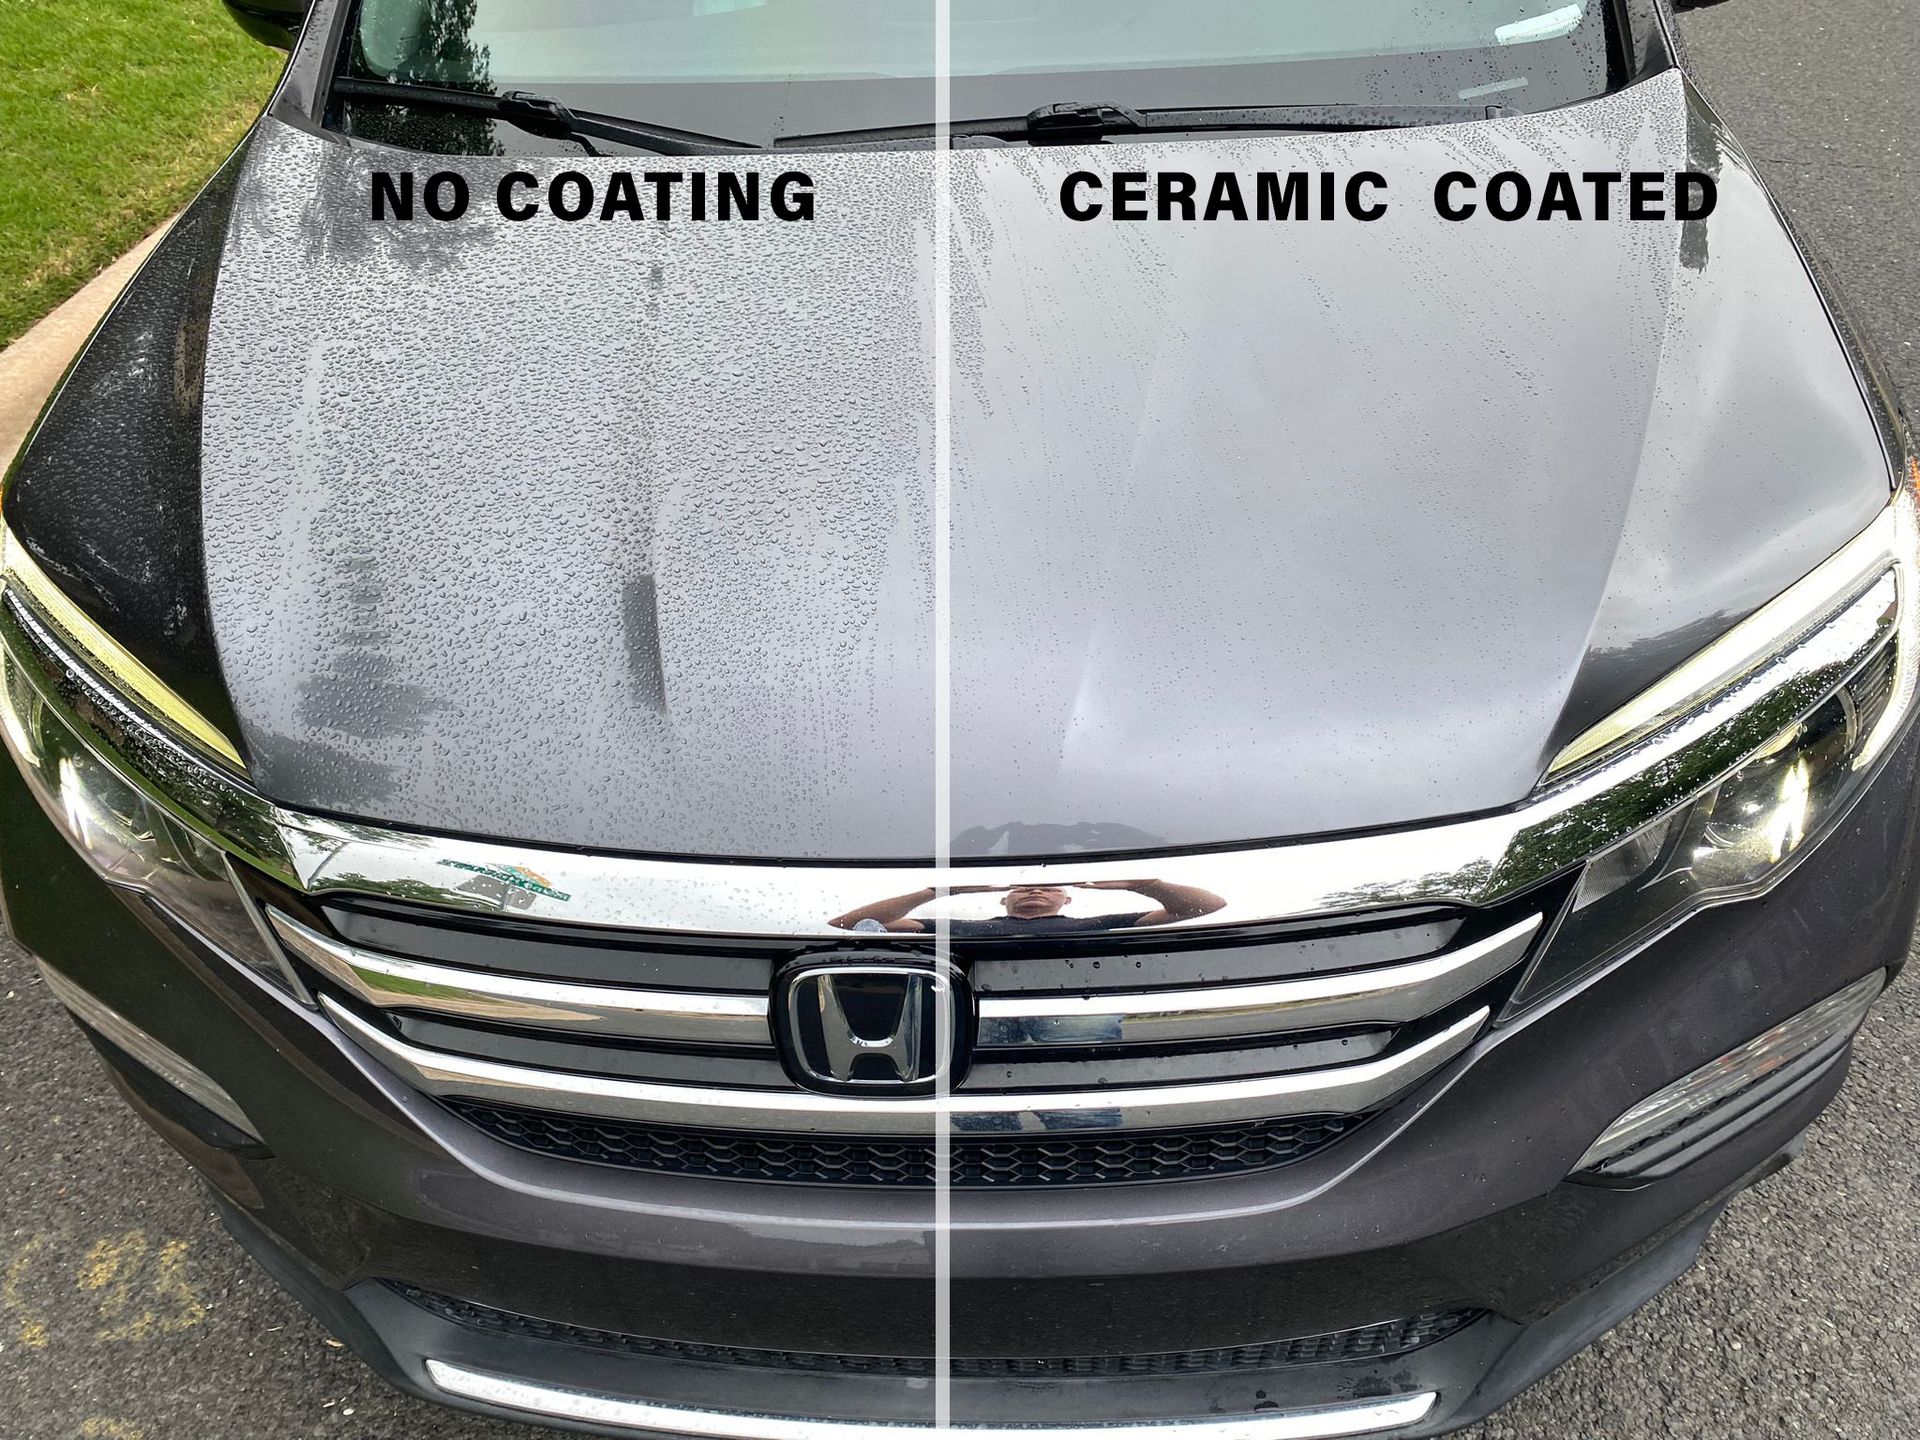 A picture of a car before and after being ceramic coated